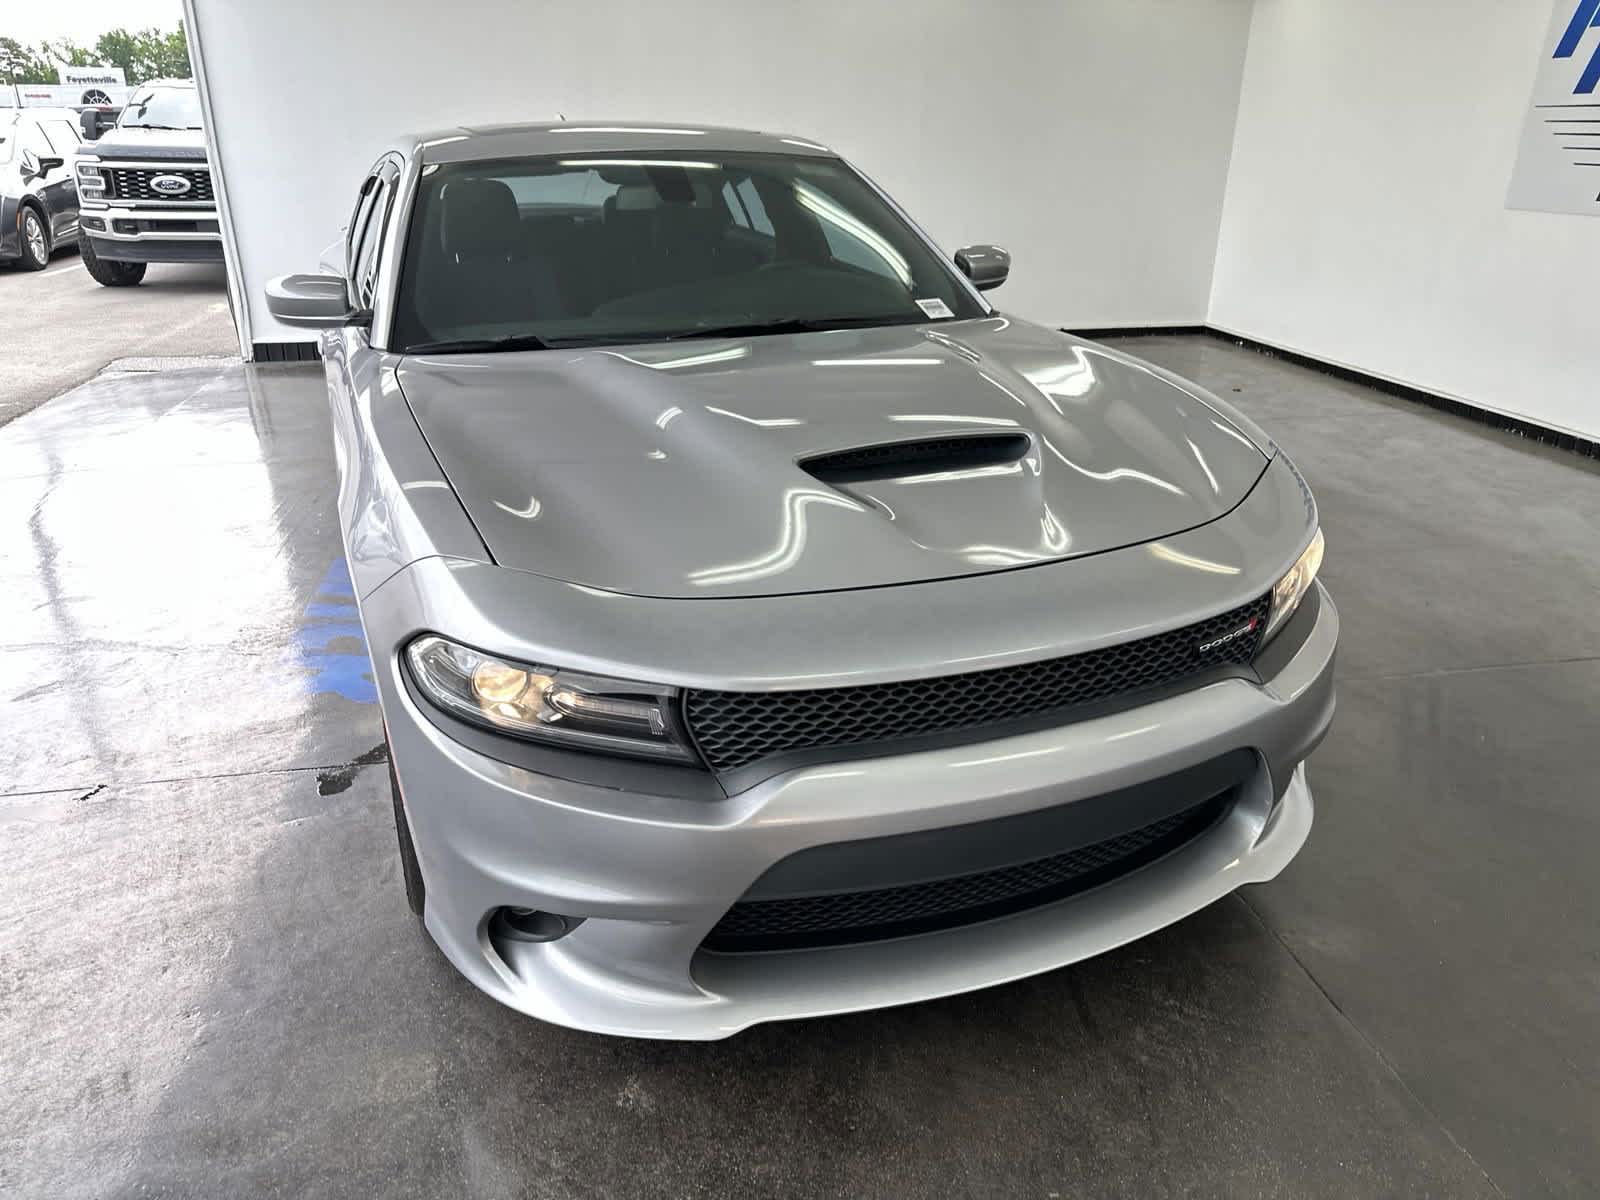 2018 Dodge Charger R/T 3